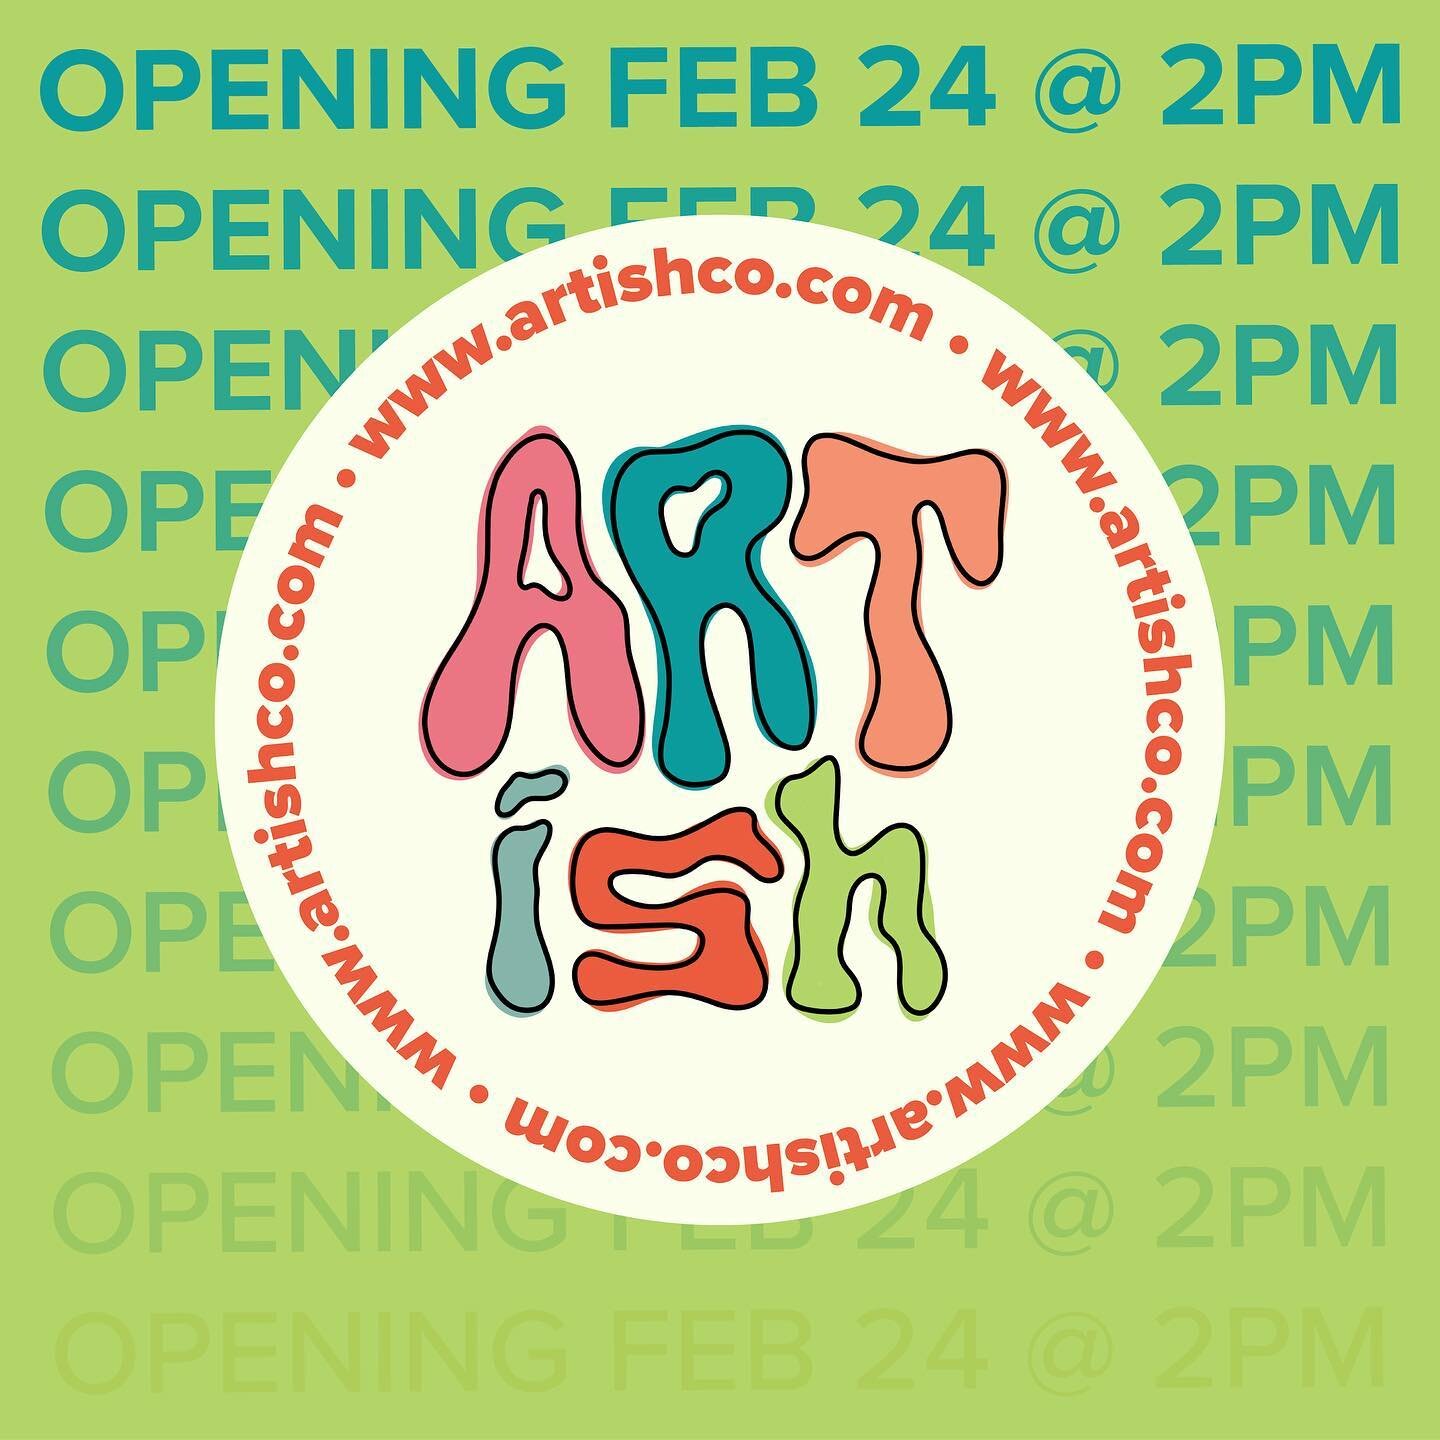 I&rsquo;m pleased to announce that ARTish co. will be open for business on Friday, February 24th at 2PM!! 

i&rsquo;ve been working so hard to make this happen and i&rsquo;m ecstatic to see my vision finally come to life. set your reminders people! ?